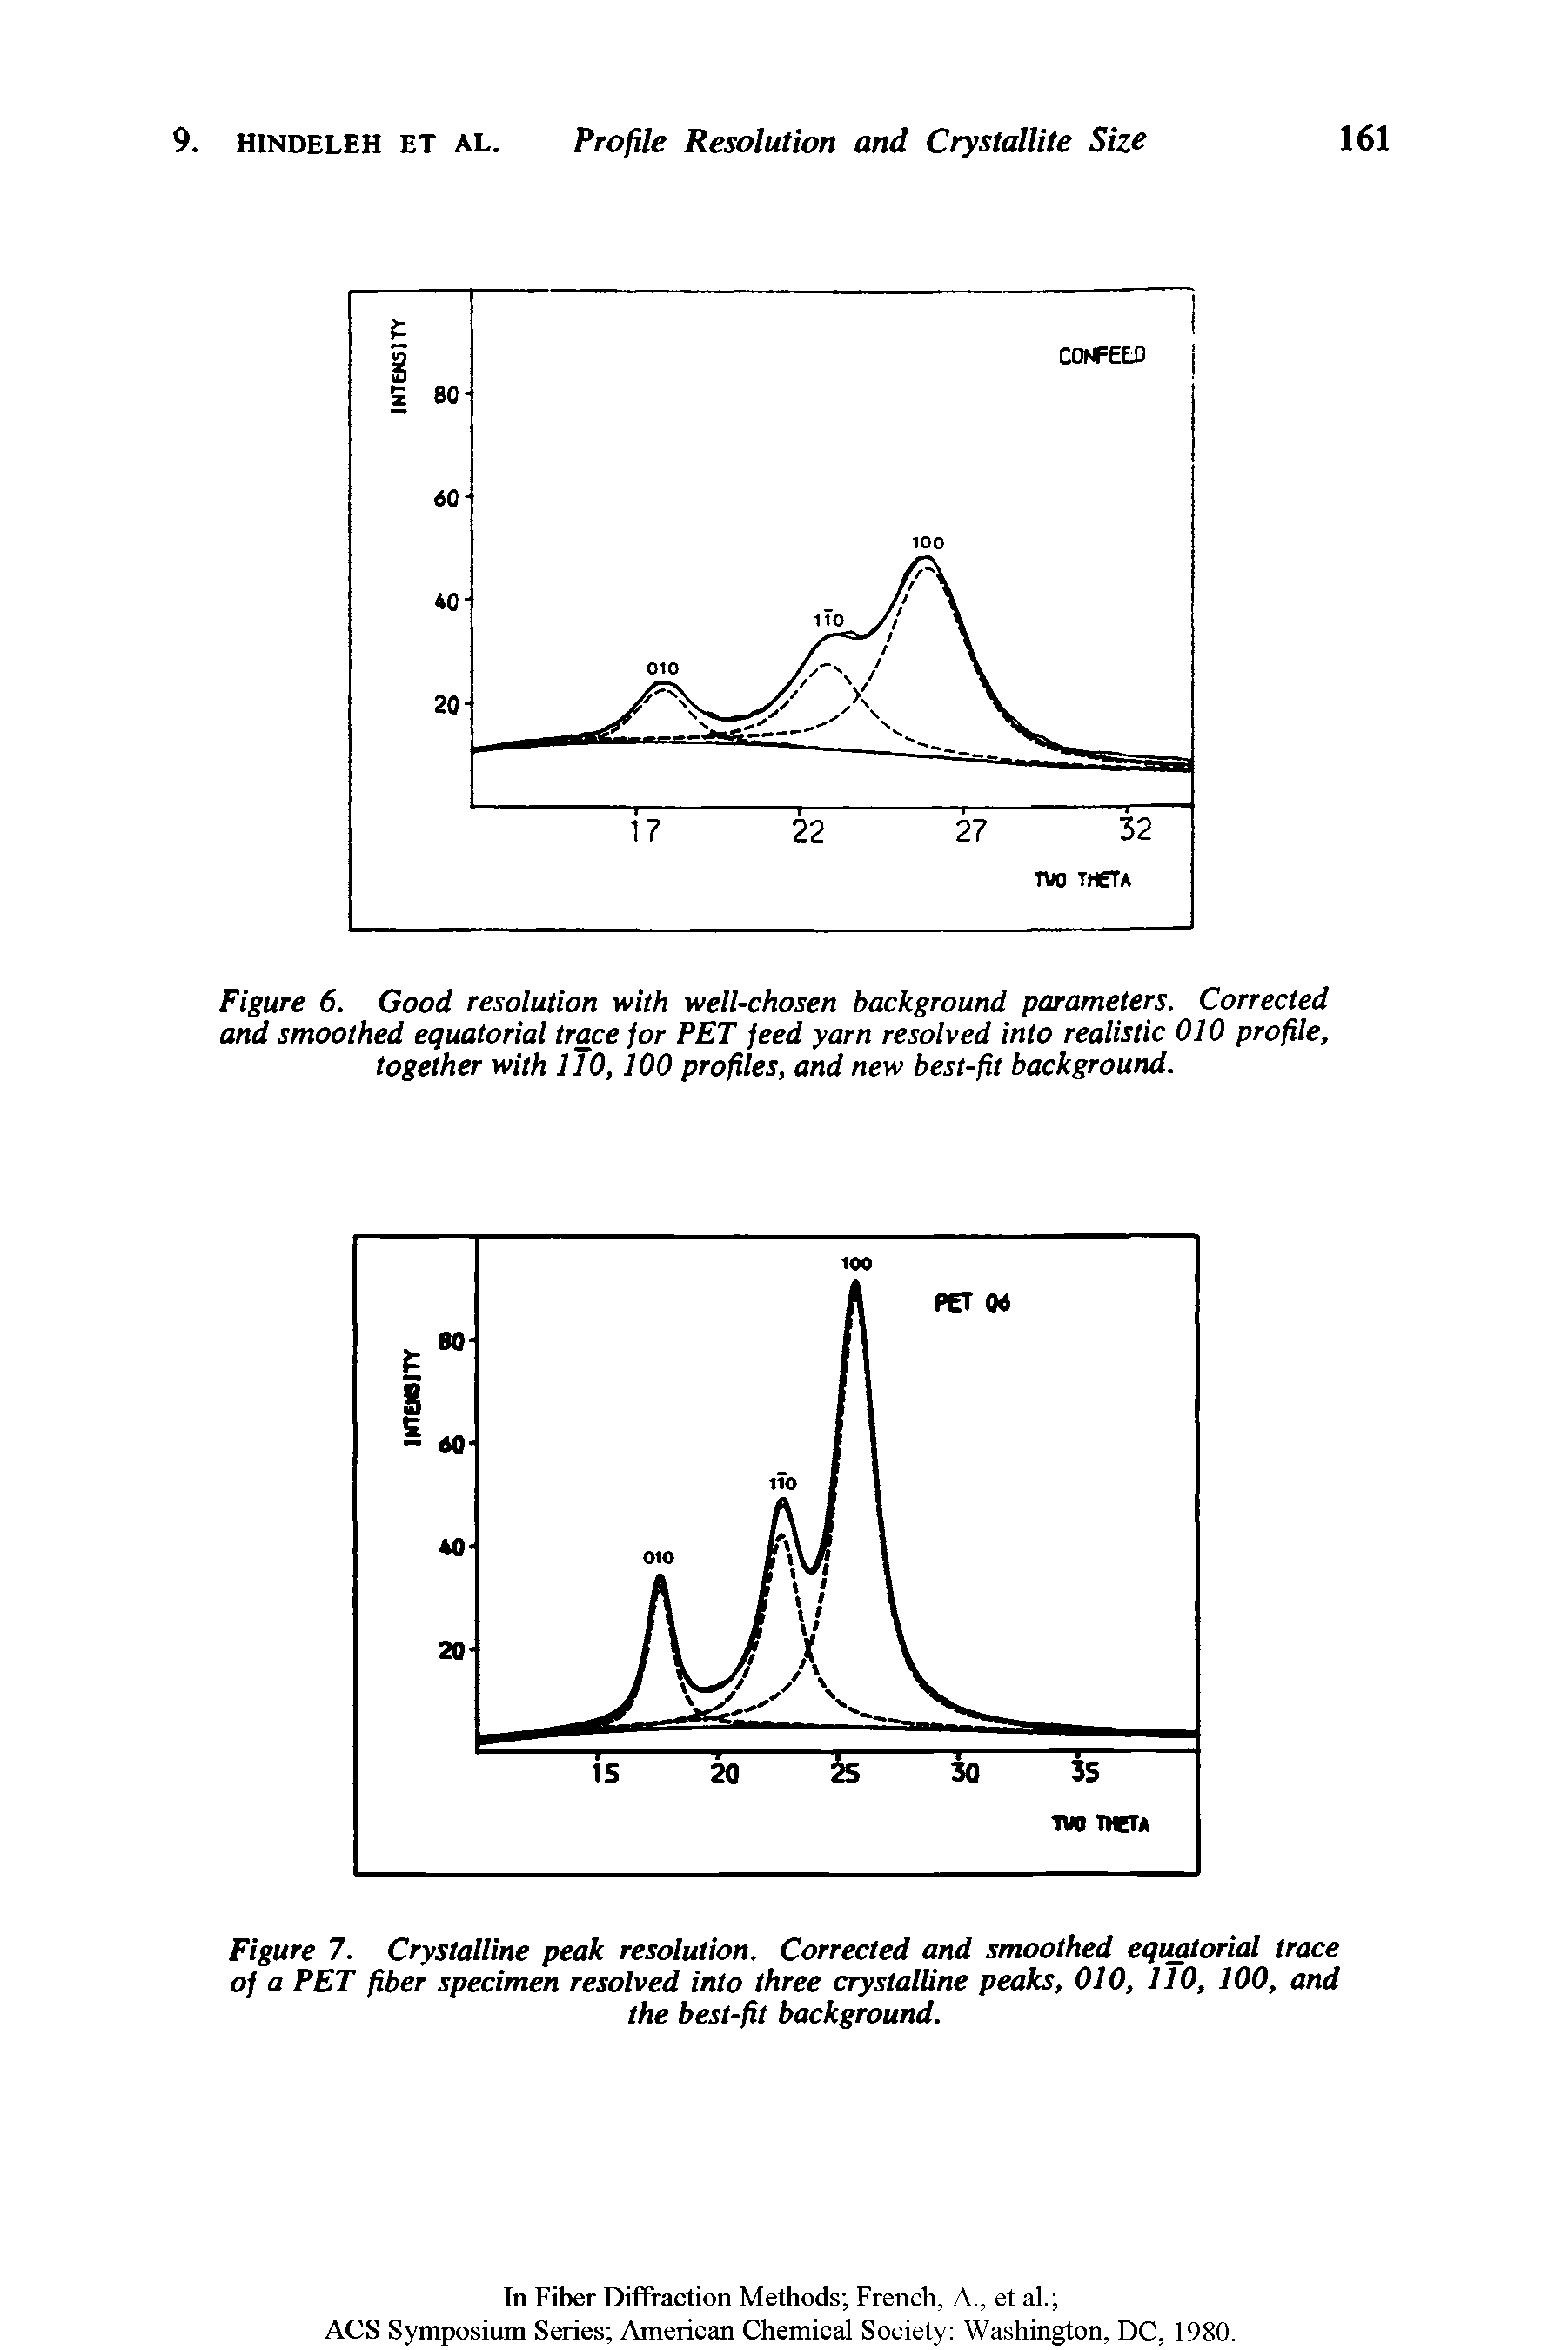 Figure 7. Crystalline peak resolution. Corrected and smoothed equatorial trace of a PET fiber specimen resolved into three crystalline peaks, 010, 110, 100, and...